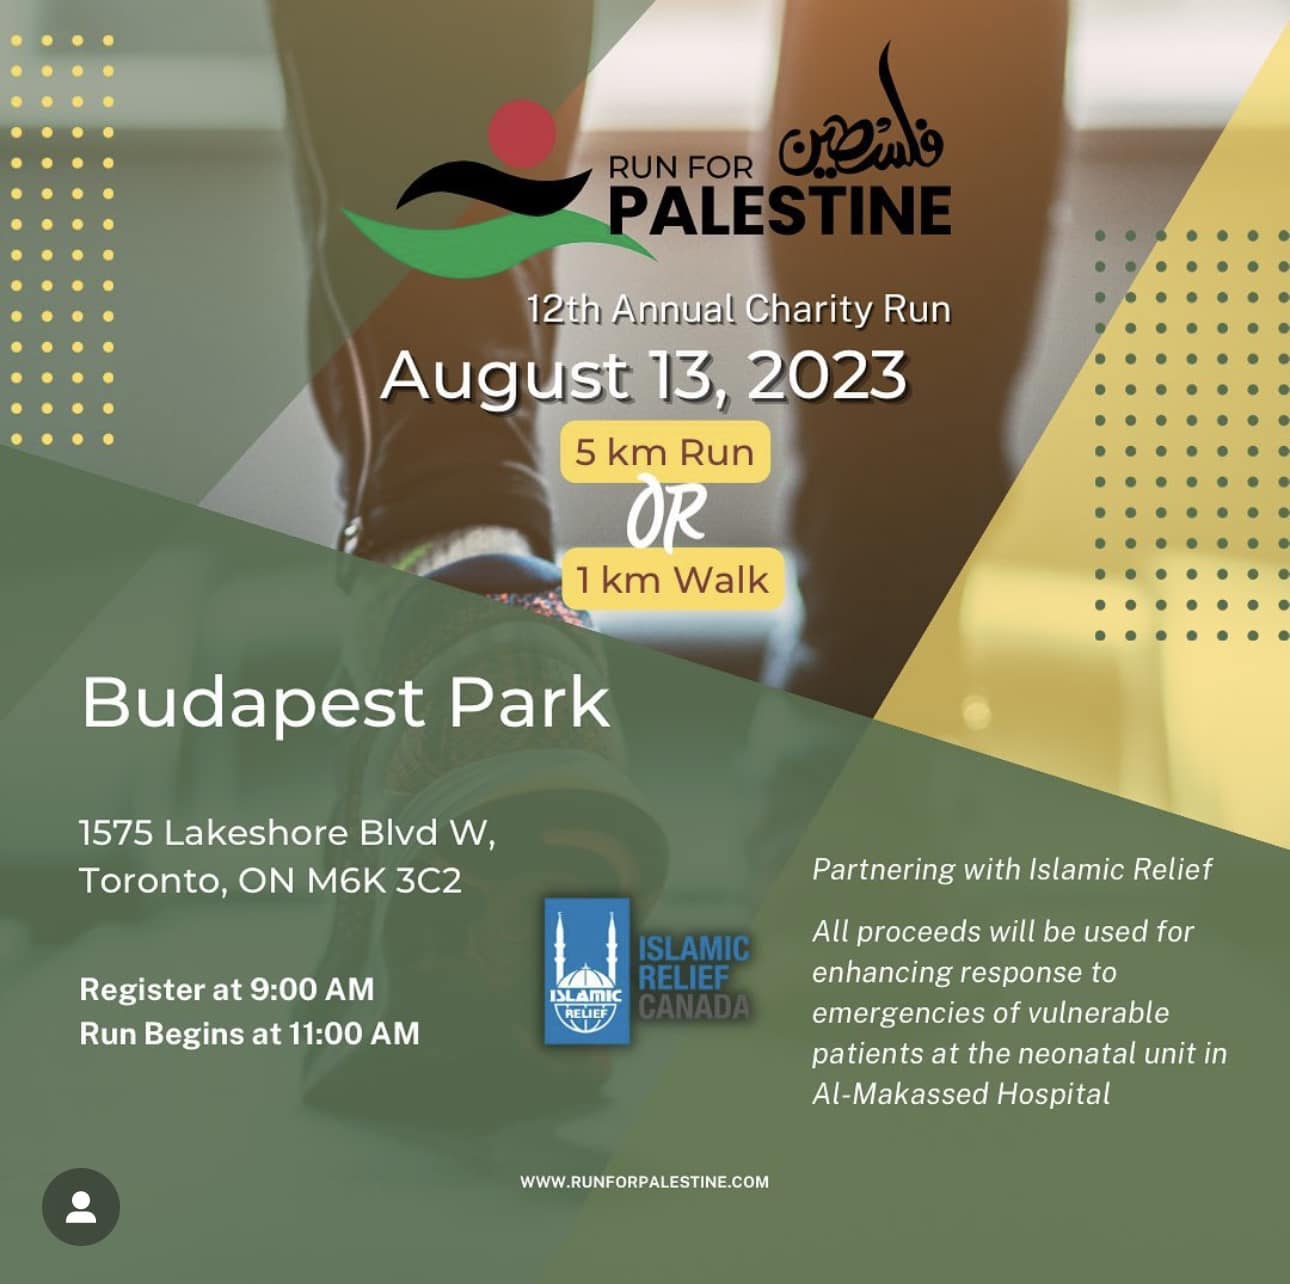 Run for Palestine fundraiser 2023 feature image